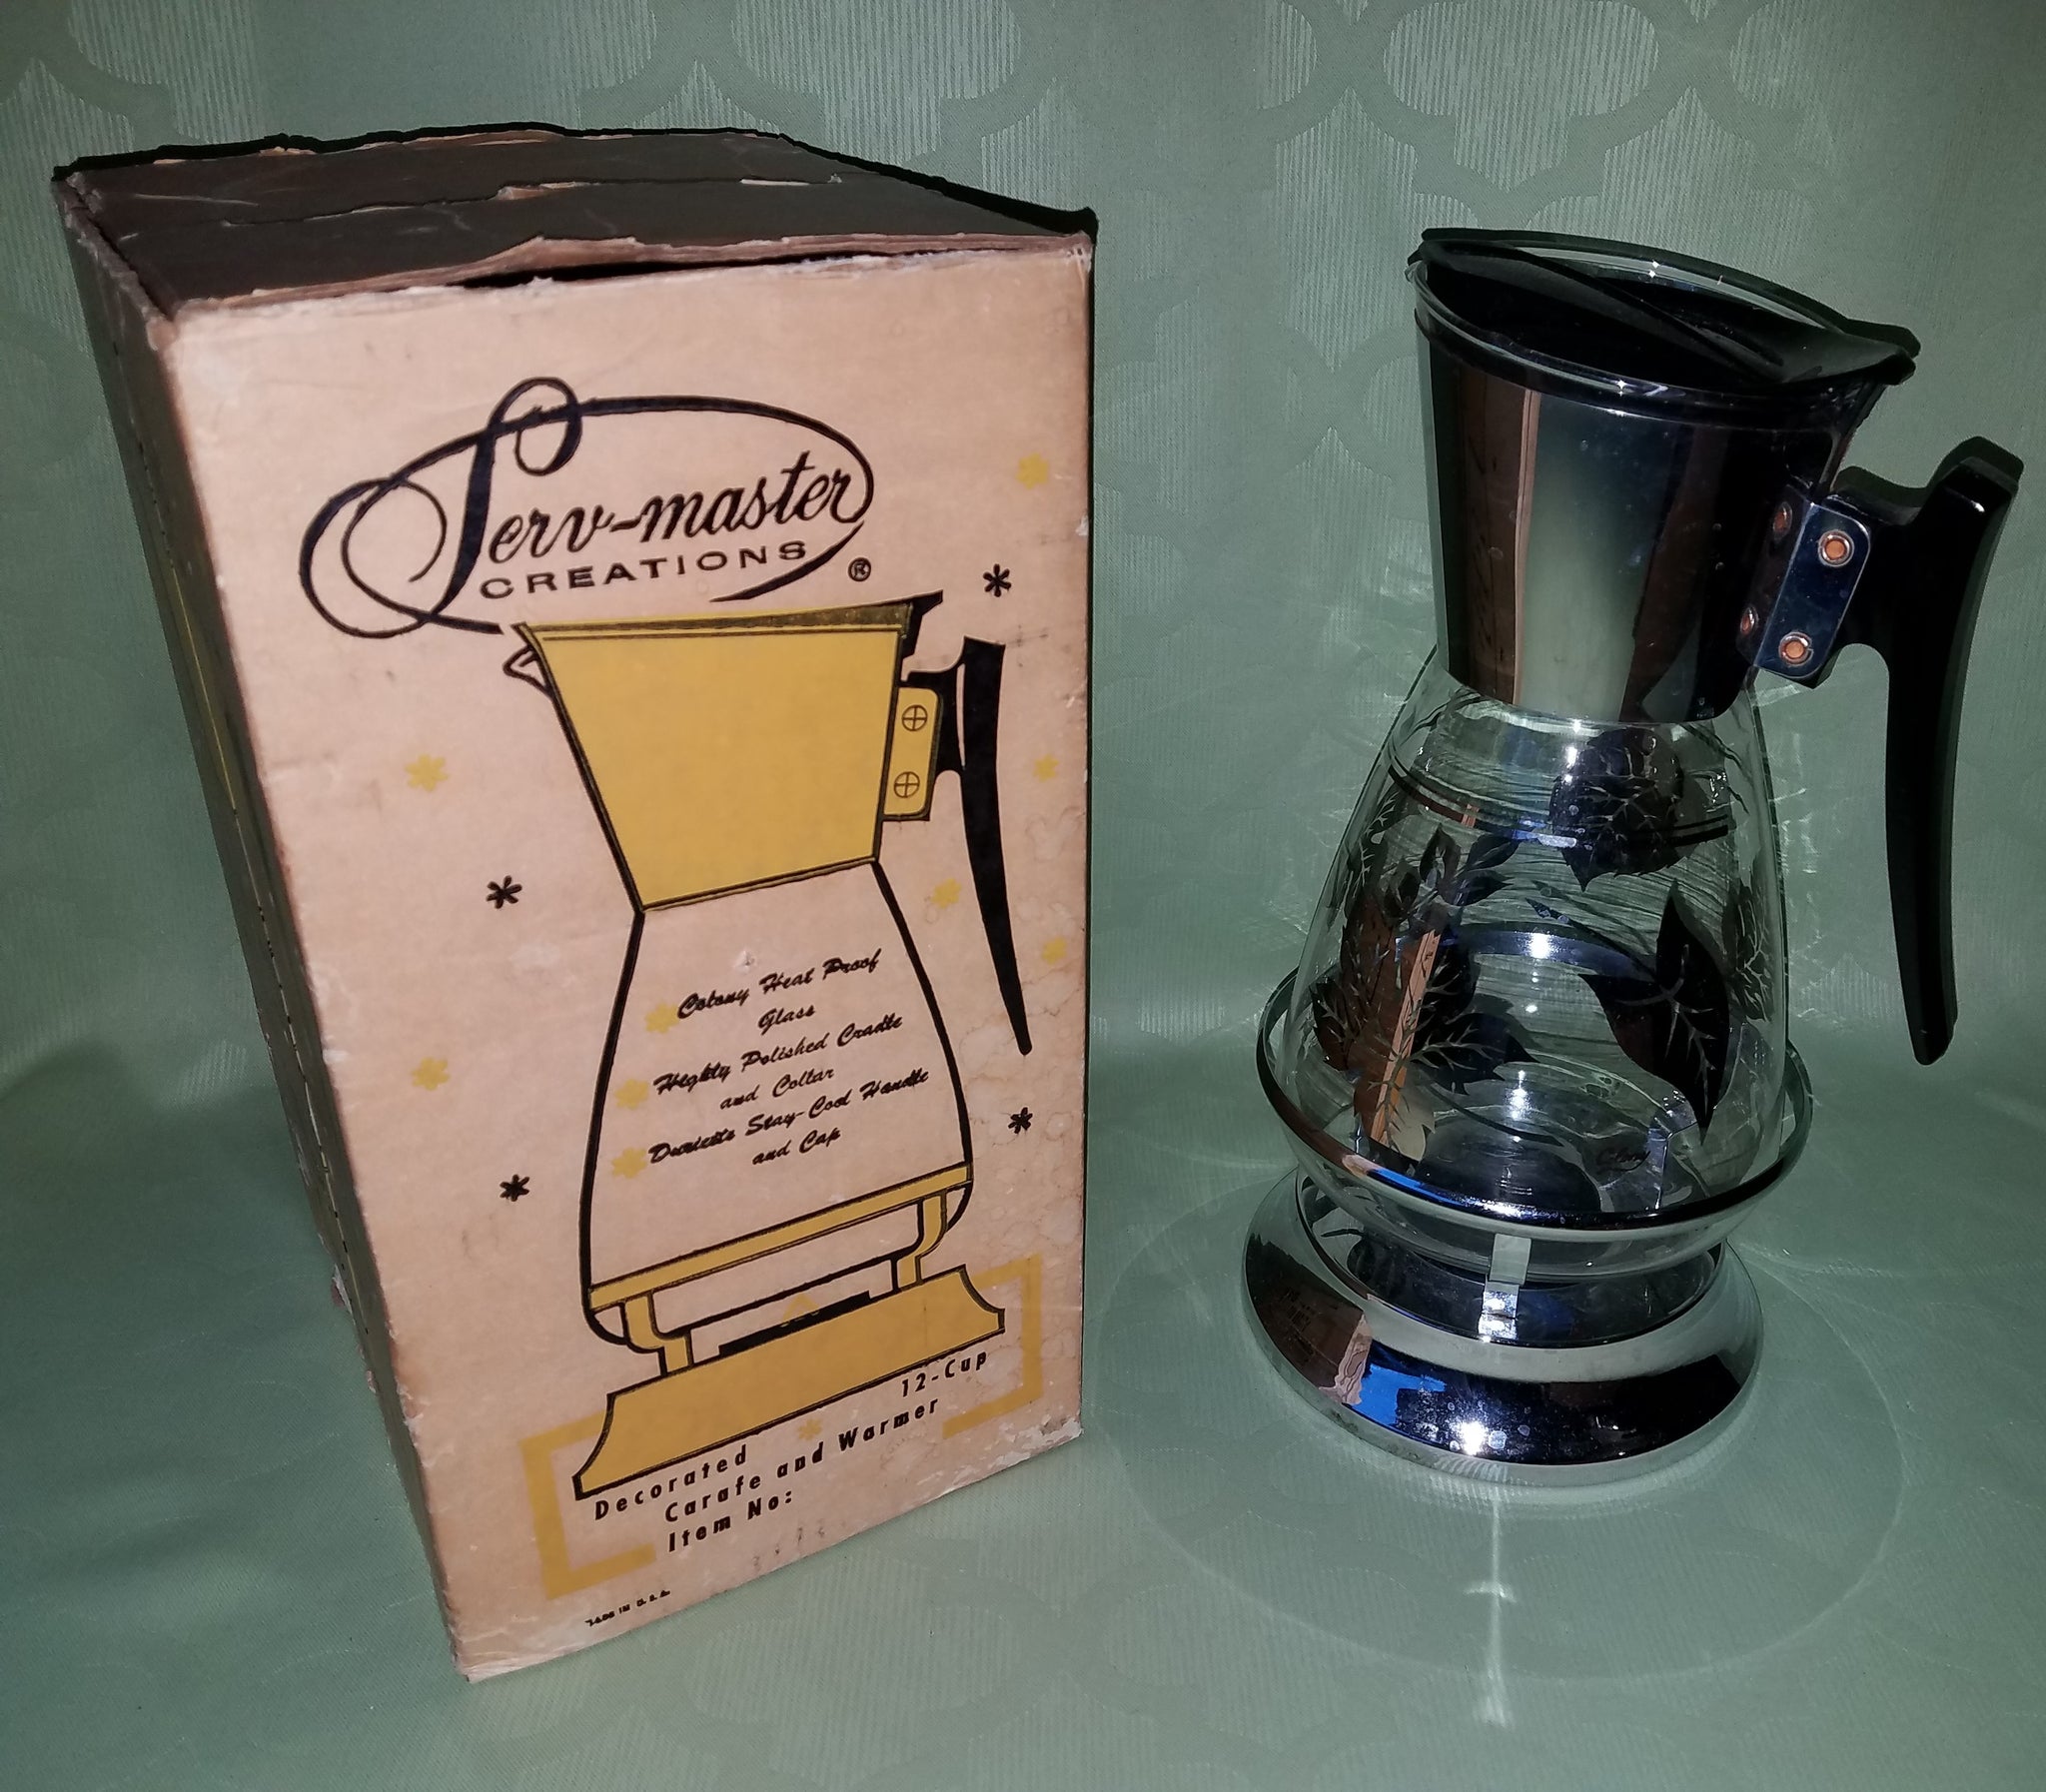 Vintage Serv-Master Creations 12-Cup Decorated Carafe & Warmer